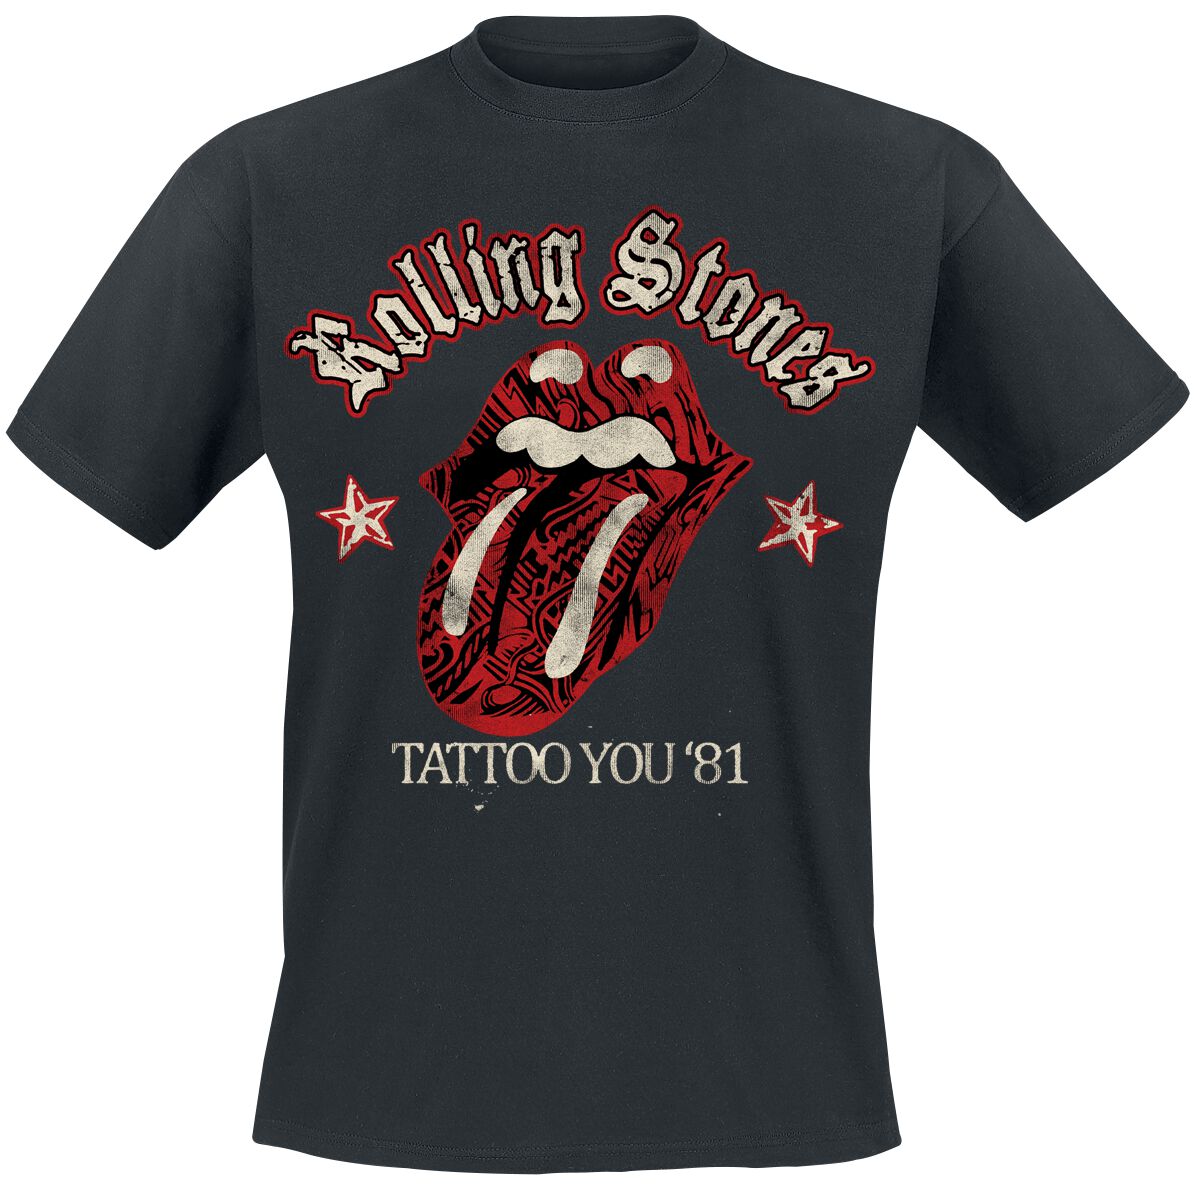 Image of T-Shirt di The Rolling Stones - Tattoo You 81 - S a XXL - Uomo - nero